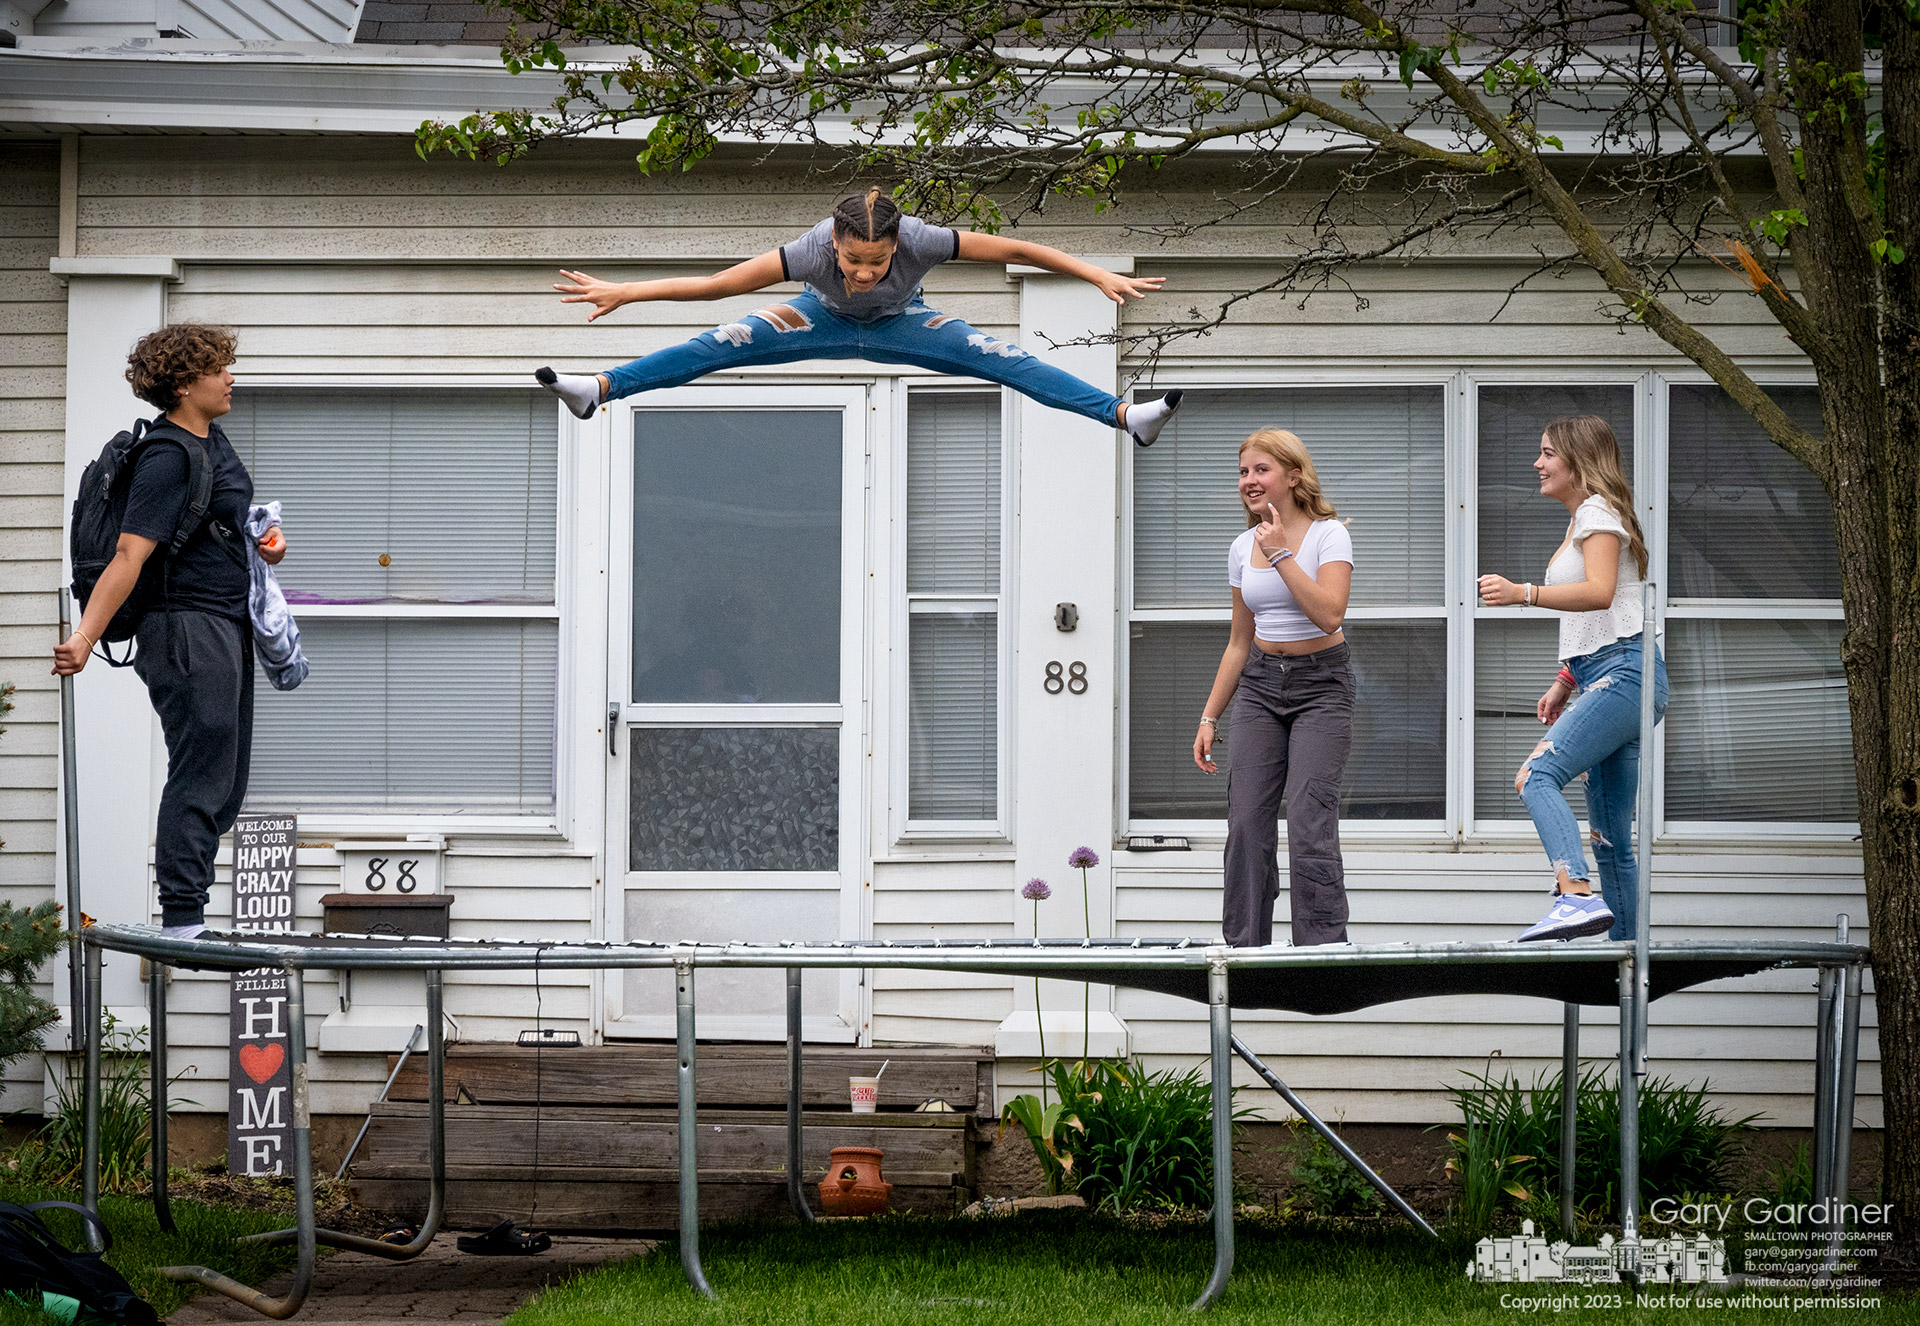 Blendon Middle School students watch their friend jump on the trampoline in her front yard before taking their turn after pausing on their way home after school. My Final Photo for May 8, 2023.